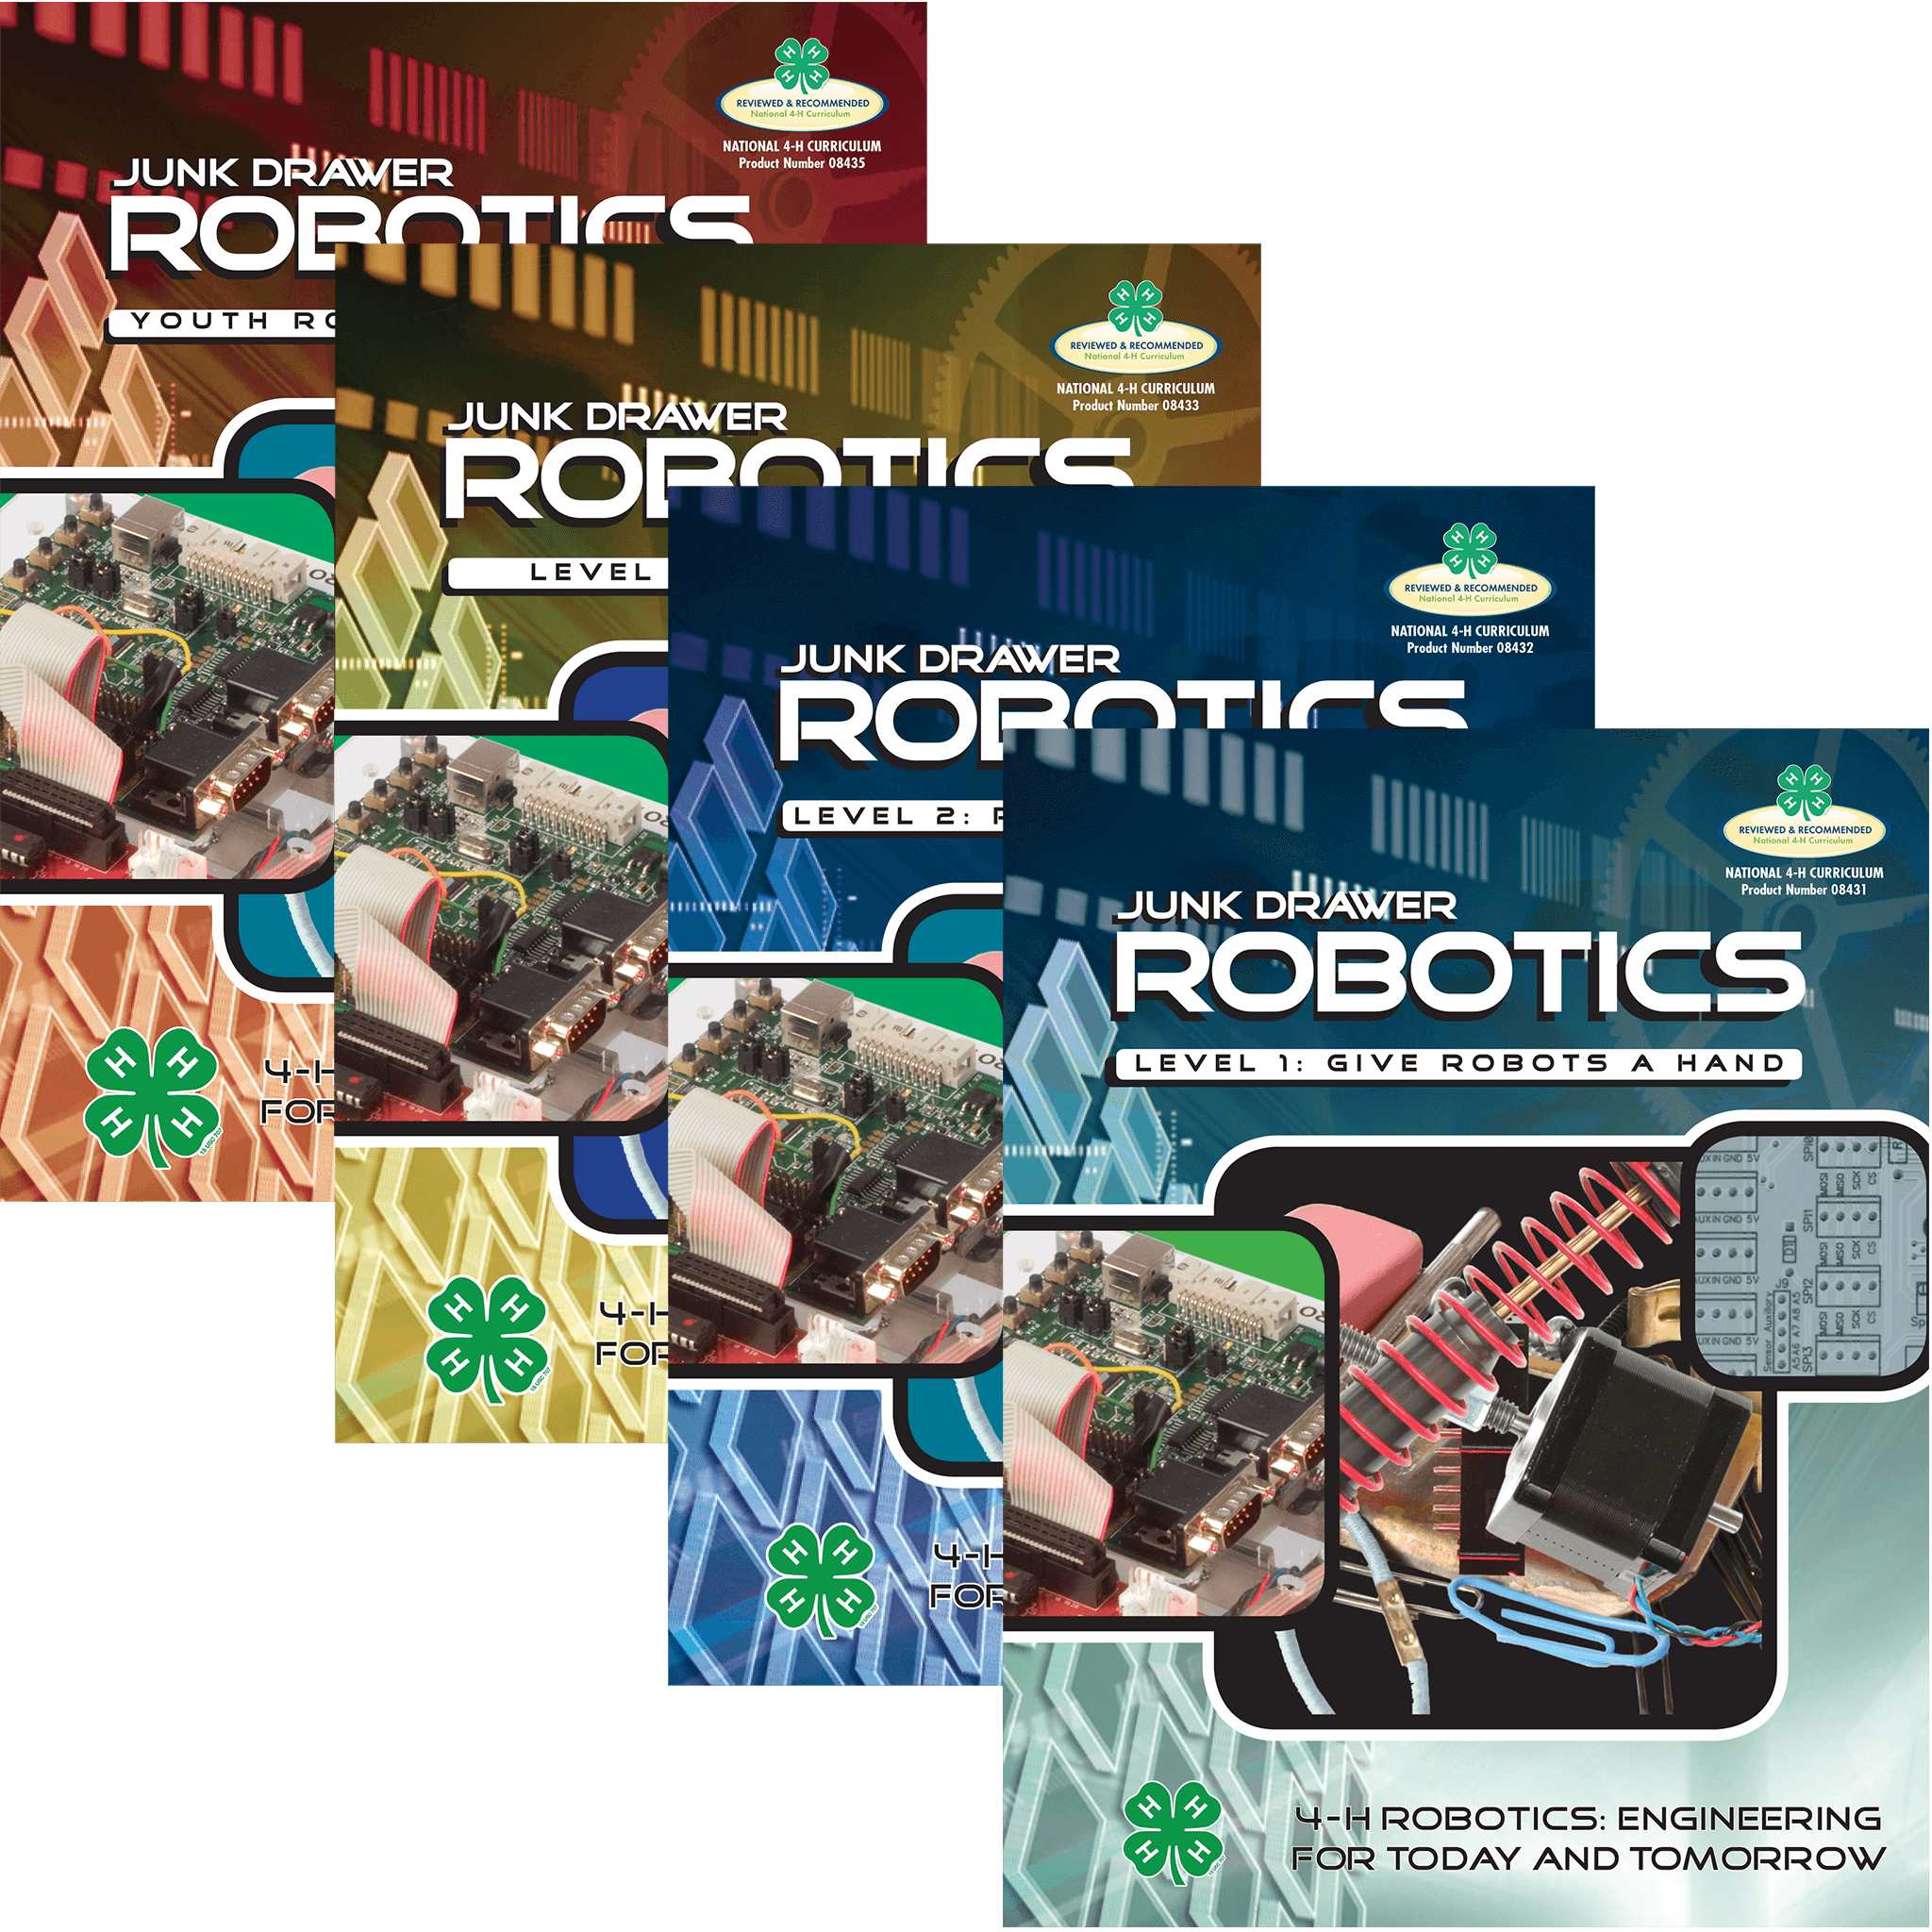 The 4 covers of the Junk Drawer Robotics Curriculum - Levels 1 through 4.